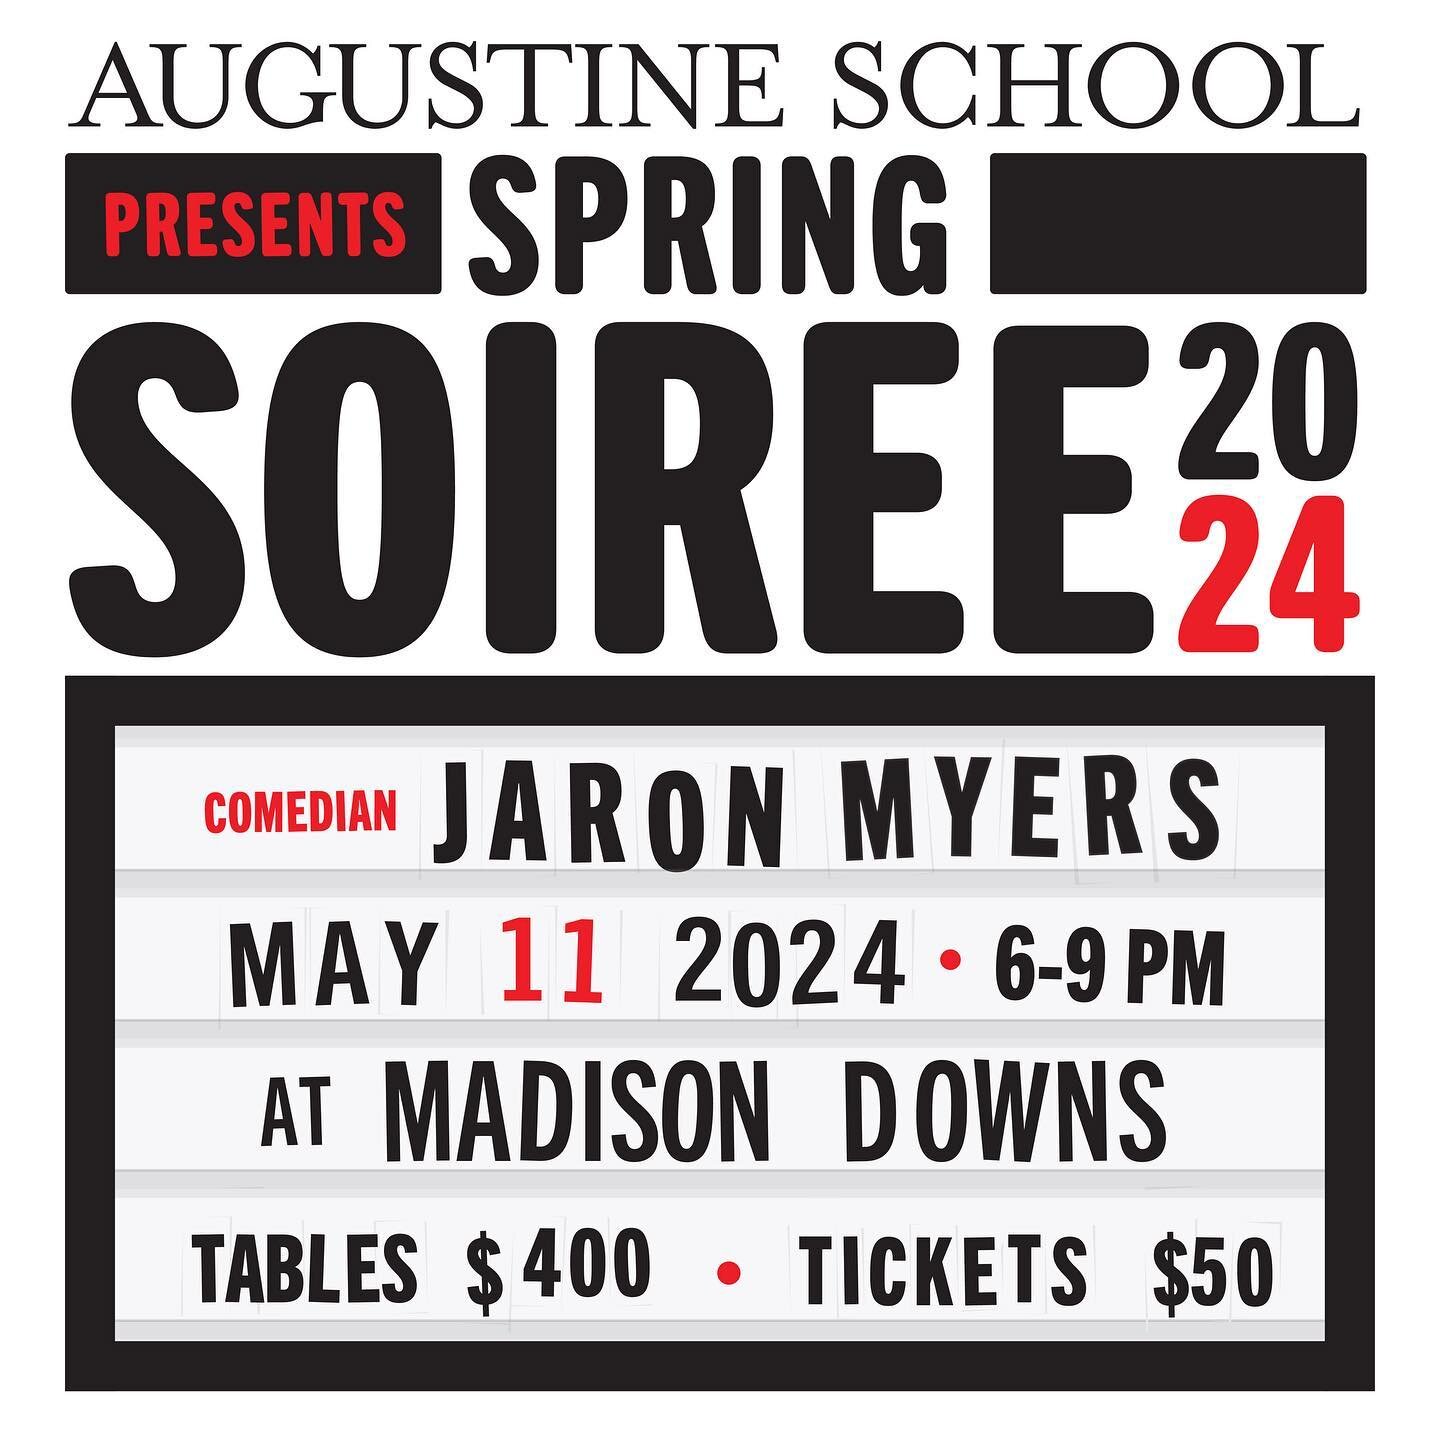 Save the date for this year&rsquo;s Spring Soiree! This year we are thrilled to welcome comedian @jaronmyers for a night of laughter, dinner, drinks, and a live and silent auction benefitting @augustineschool. More details coming soon!